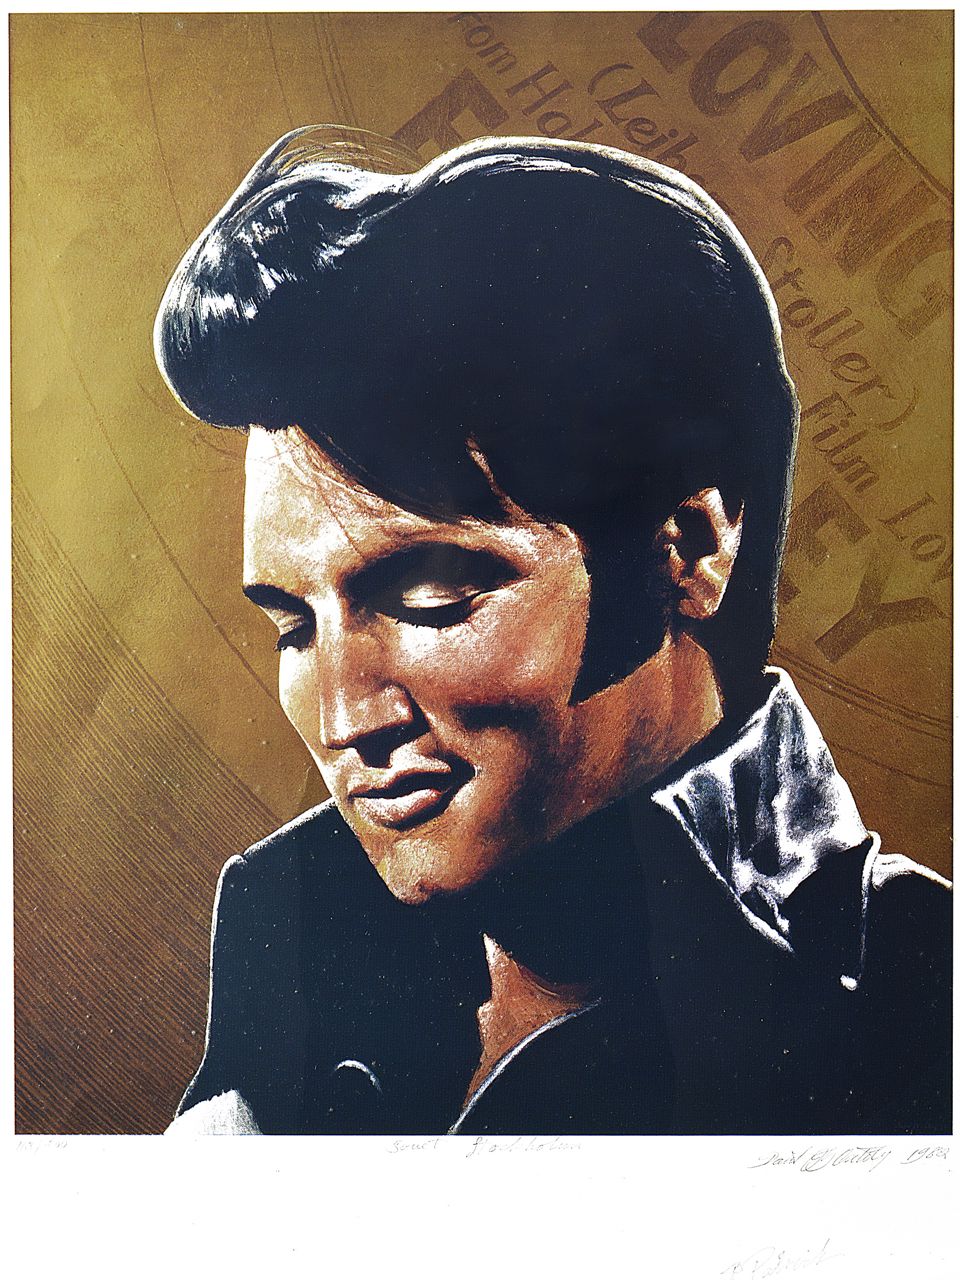 David Oxtoby (born 1938) British ?Souet Stockholm?, a limited edition print of Elvis Presley 113/